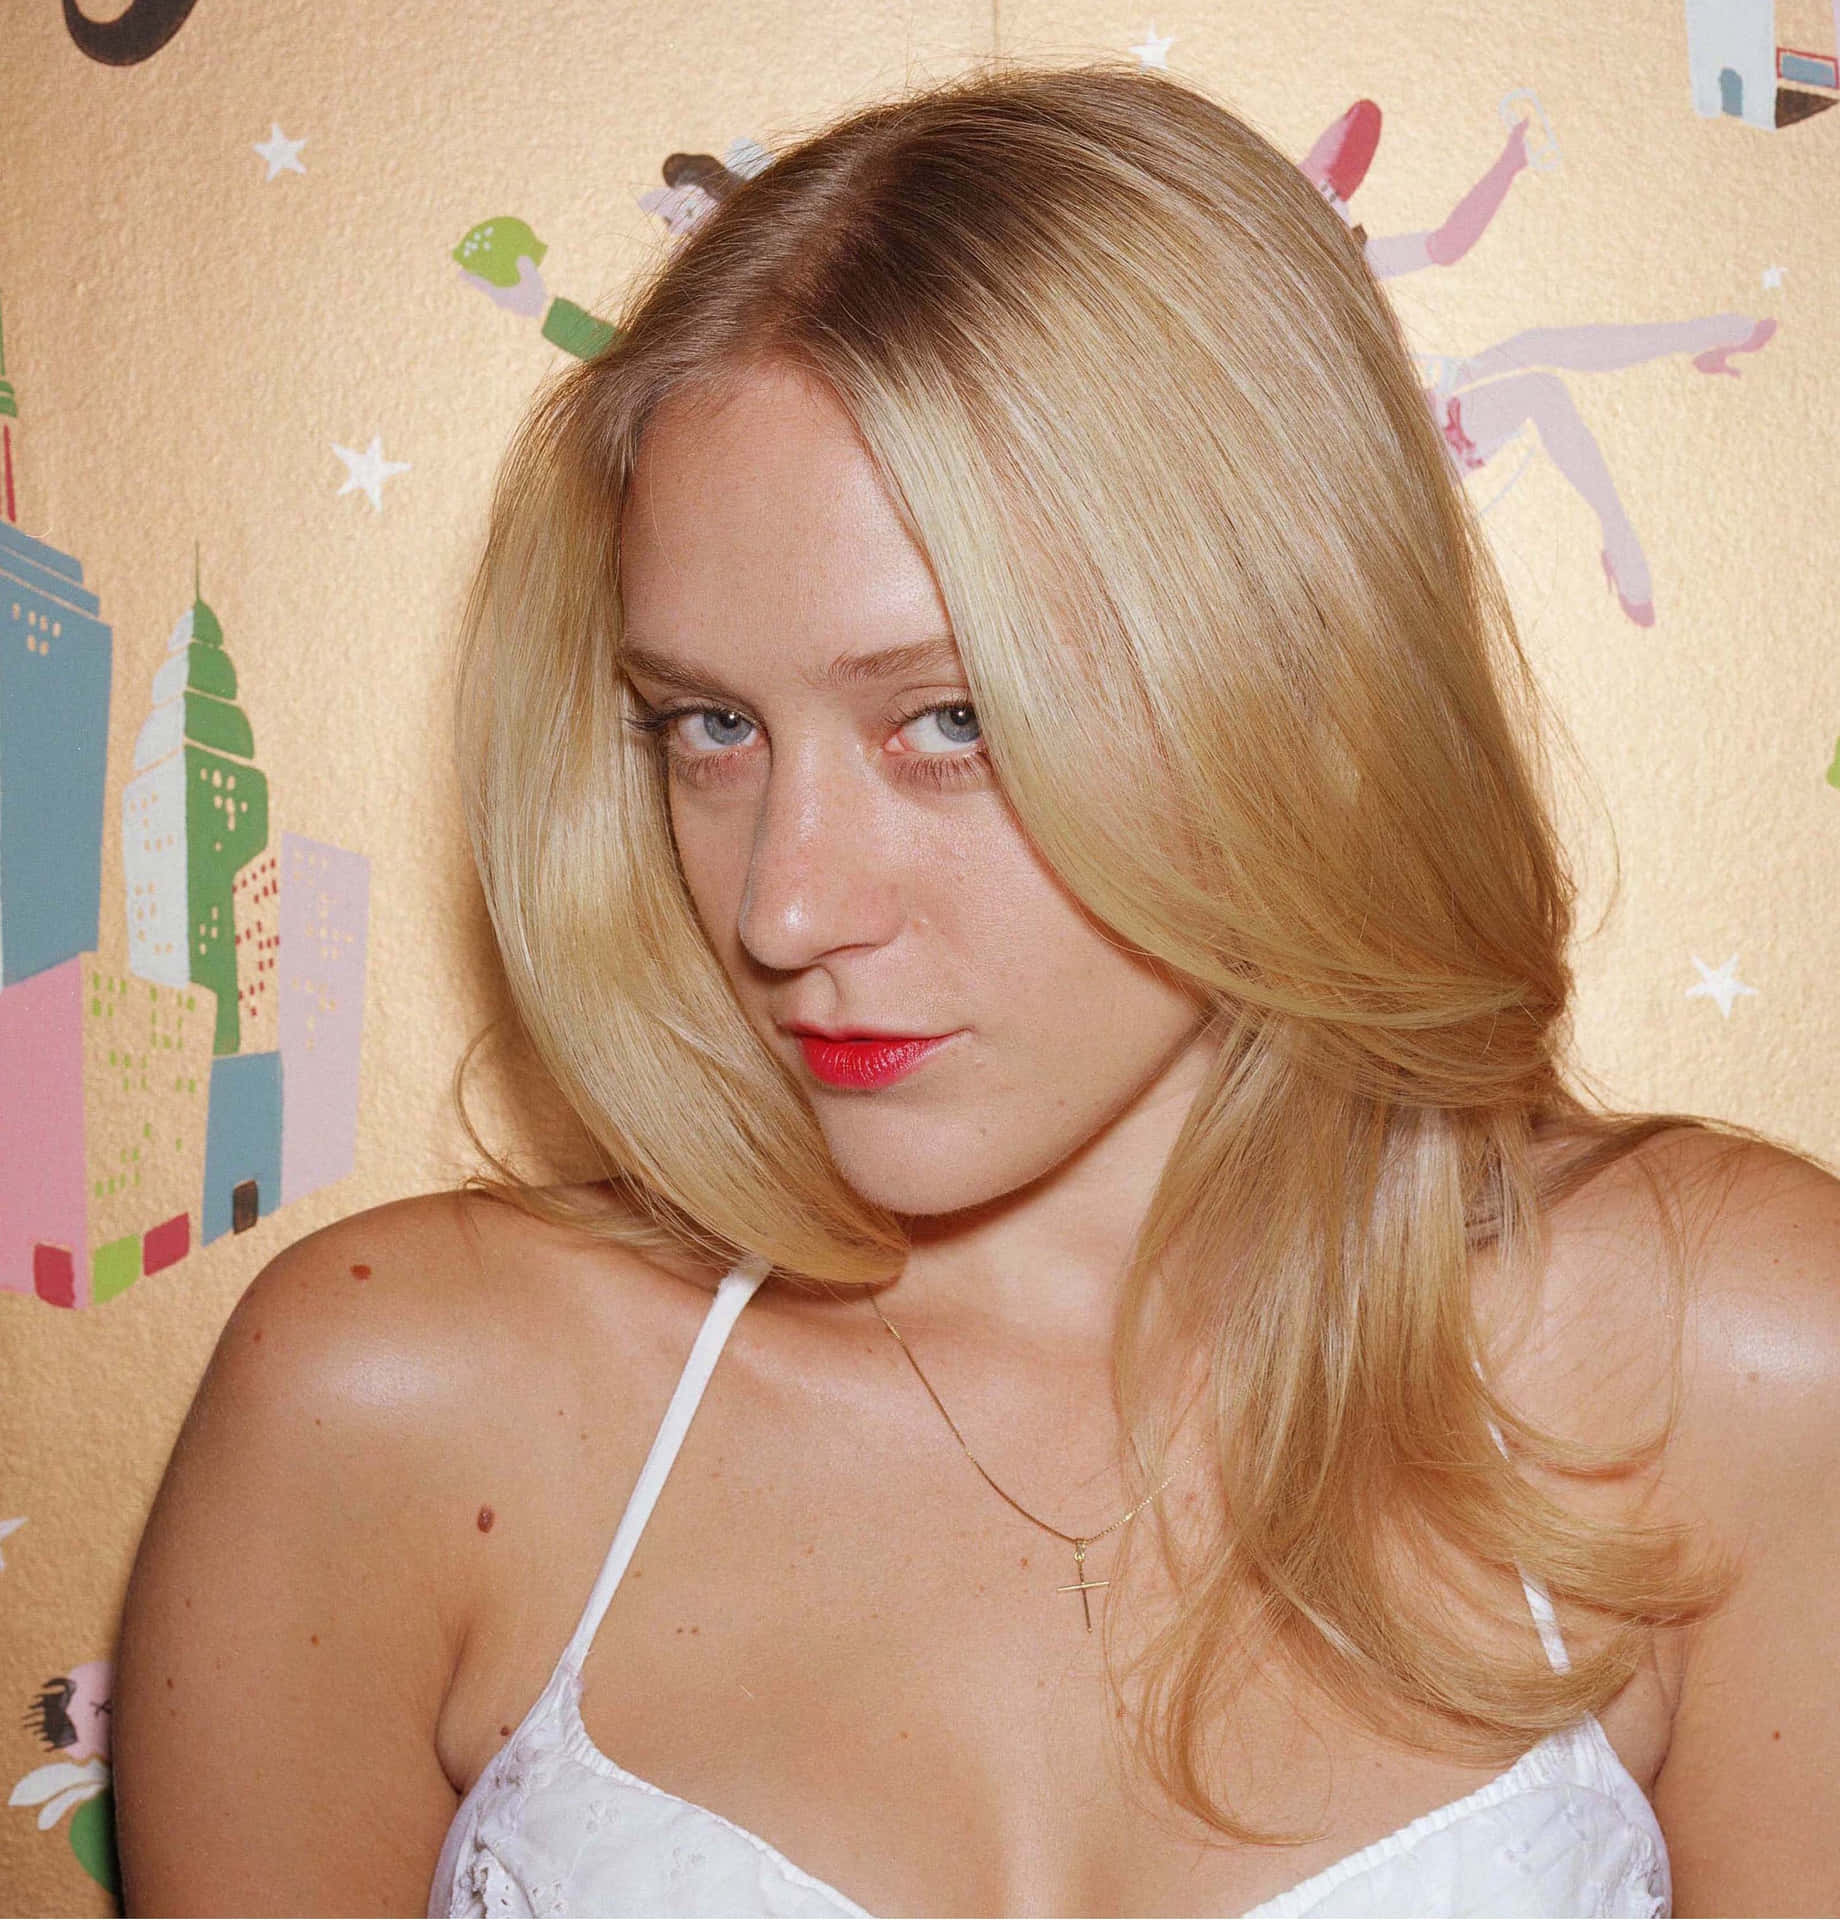 Chloë Sevigny posing confidently in an elegant outfit Wallpaper